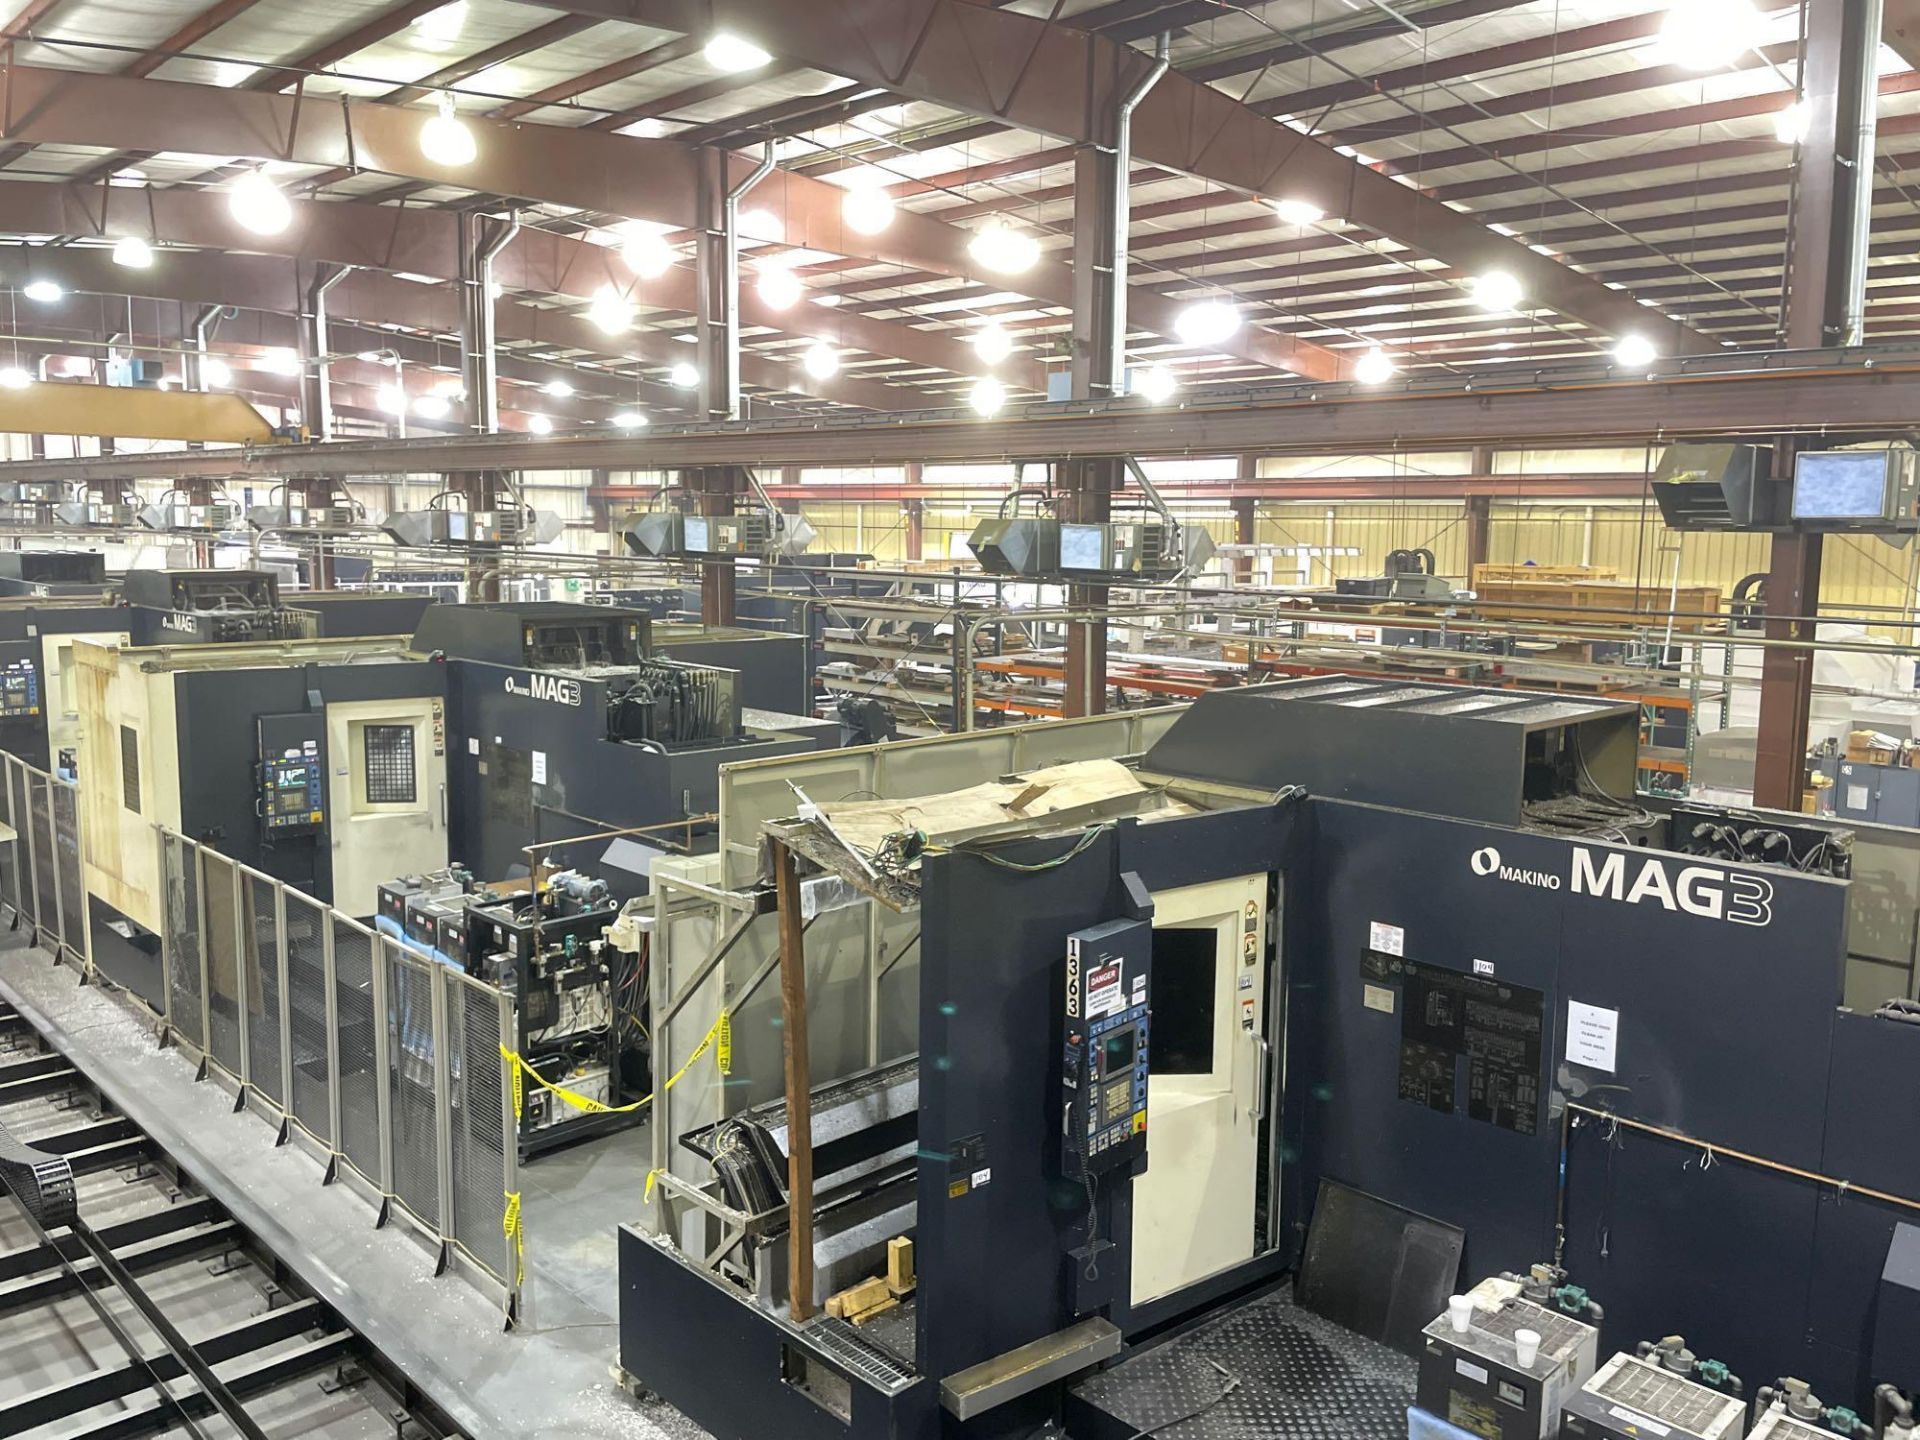 (2) Makino MAG3 5-Axis High Speed Horizontal Machining Cell, 12 A.P.C. Pallet System, as New as 2008